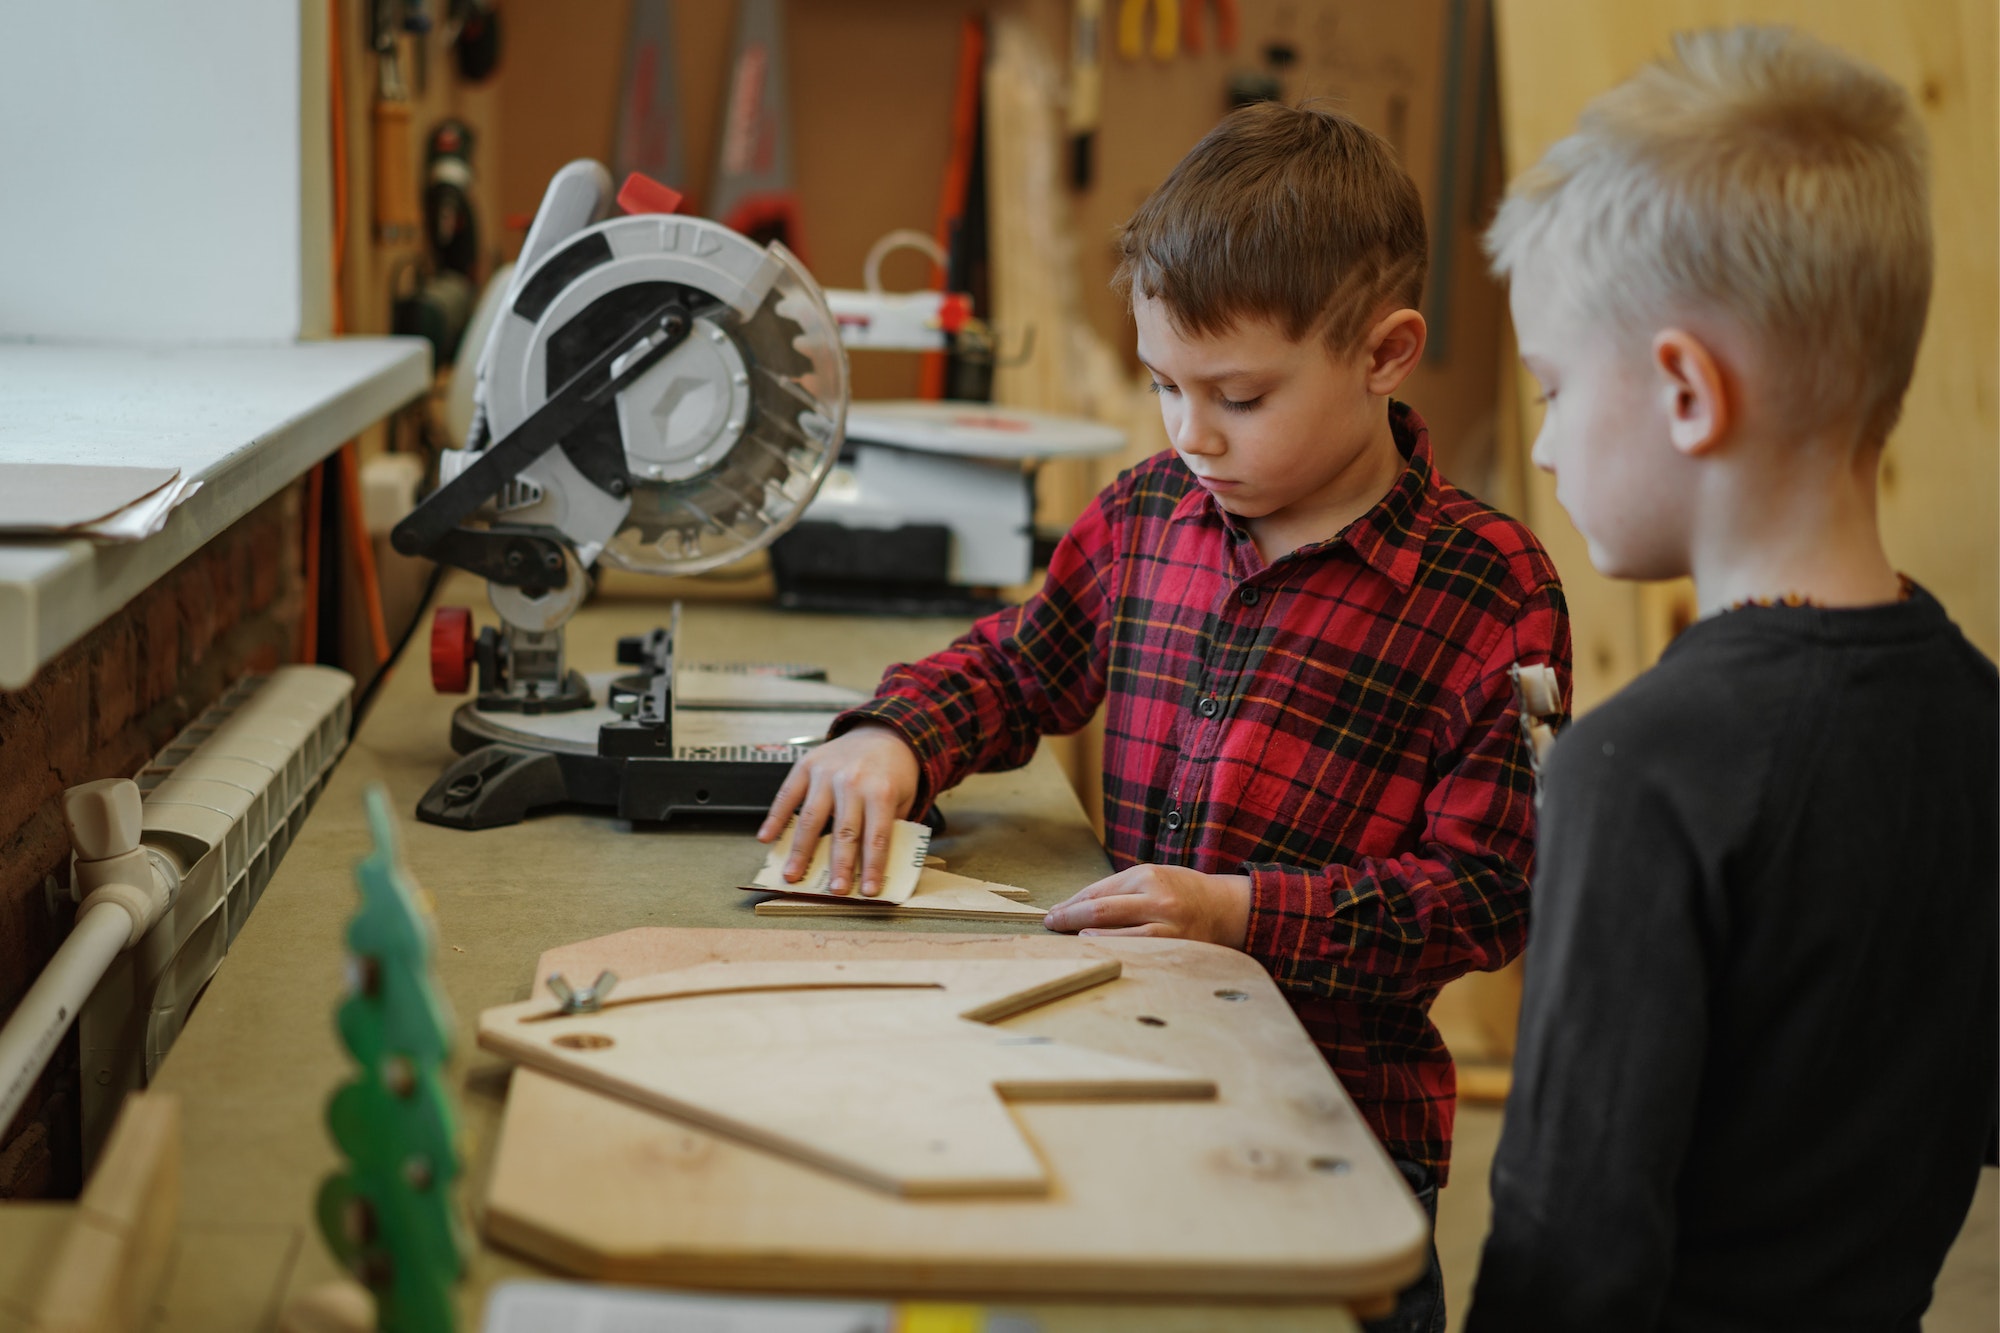 Boys work in a joinery workshop making craft of wood